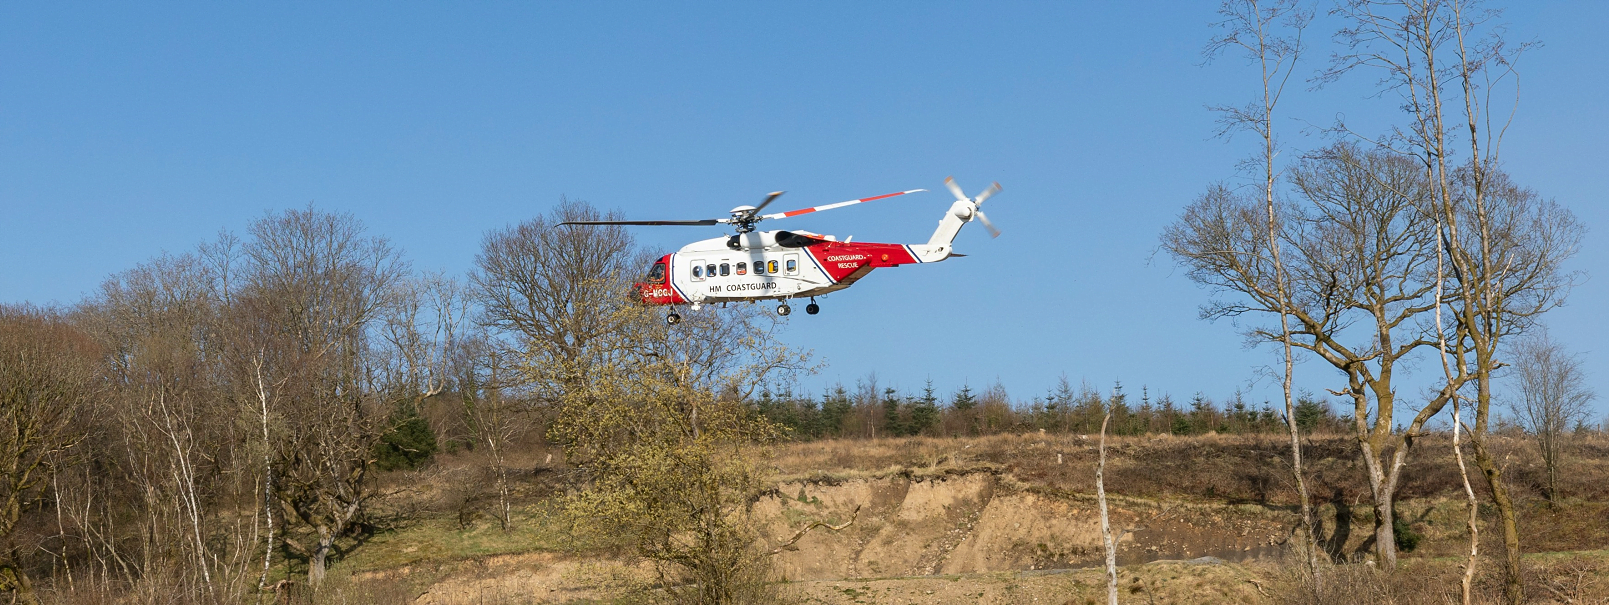 Photograph of HM Coastguard helicopter landing in remote area in UK. One of the Emergency Services which may be used in an emergency 999 situation. Image with thanks to Francois Olwage on unsplash.